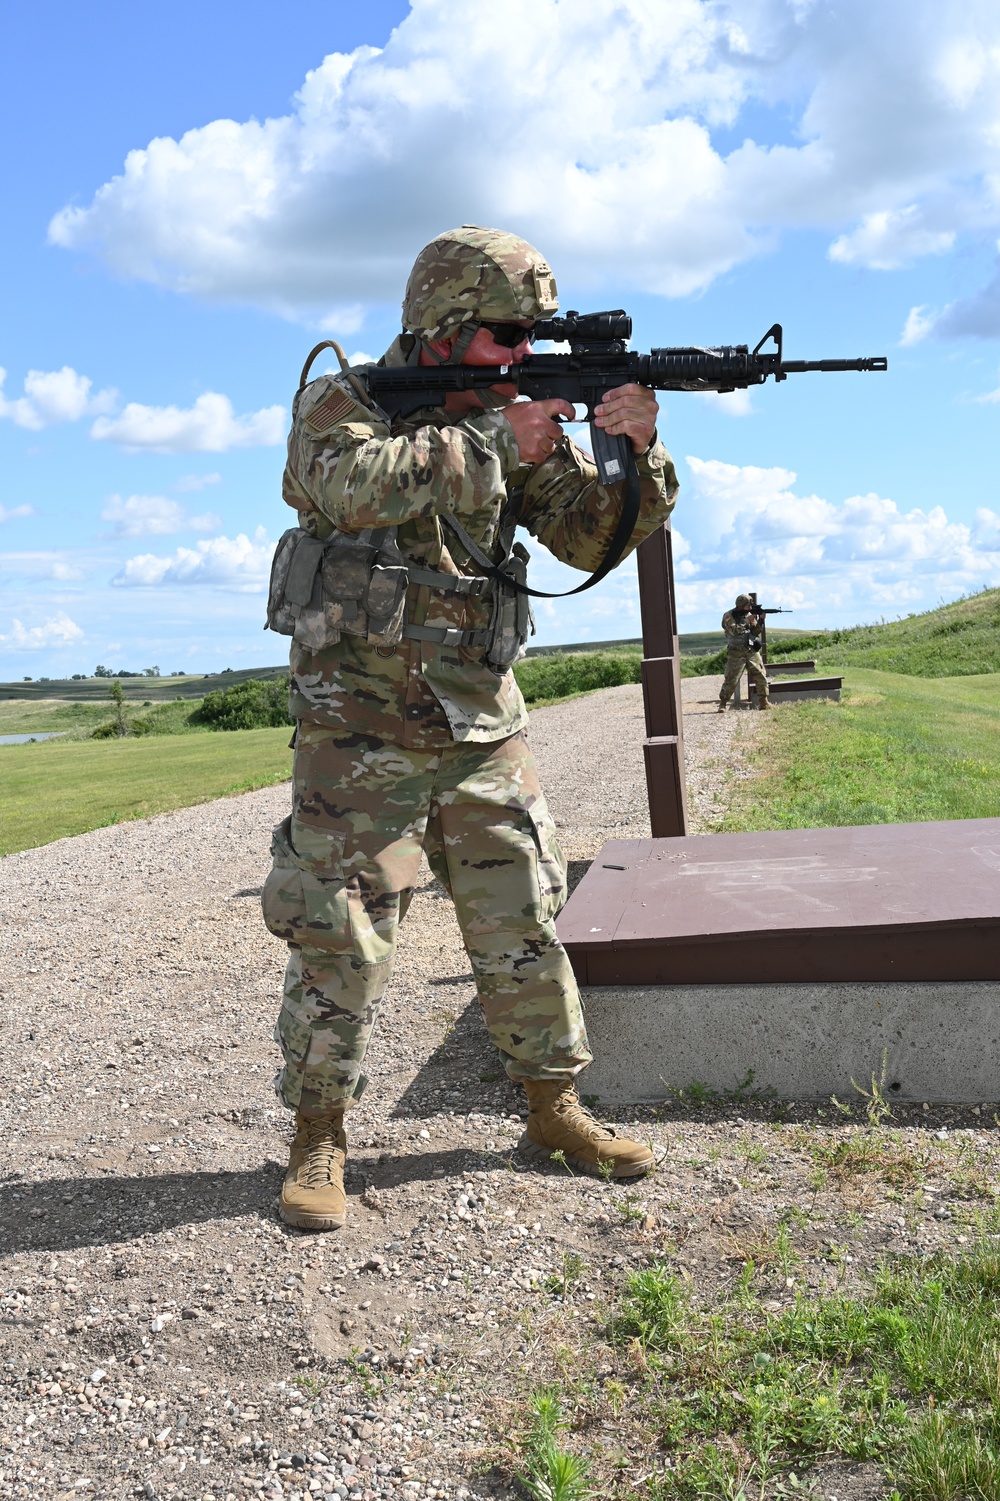 ND Air Guard wins state marksmanship match fourth year in a row